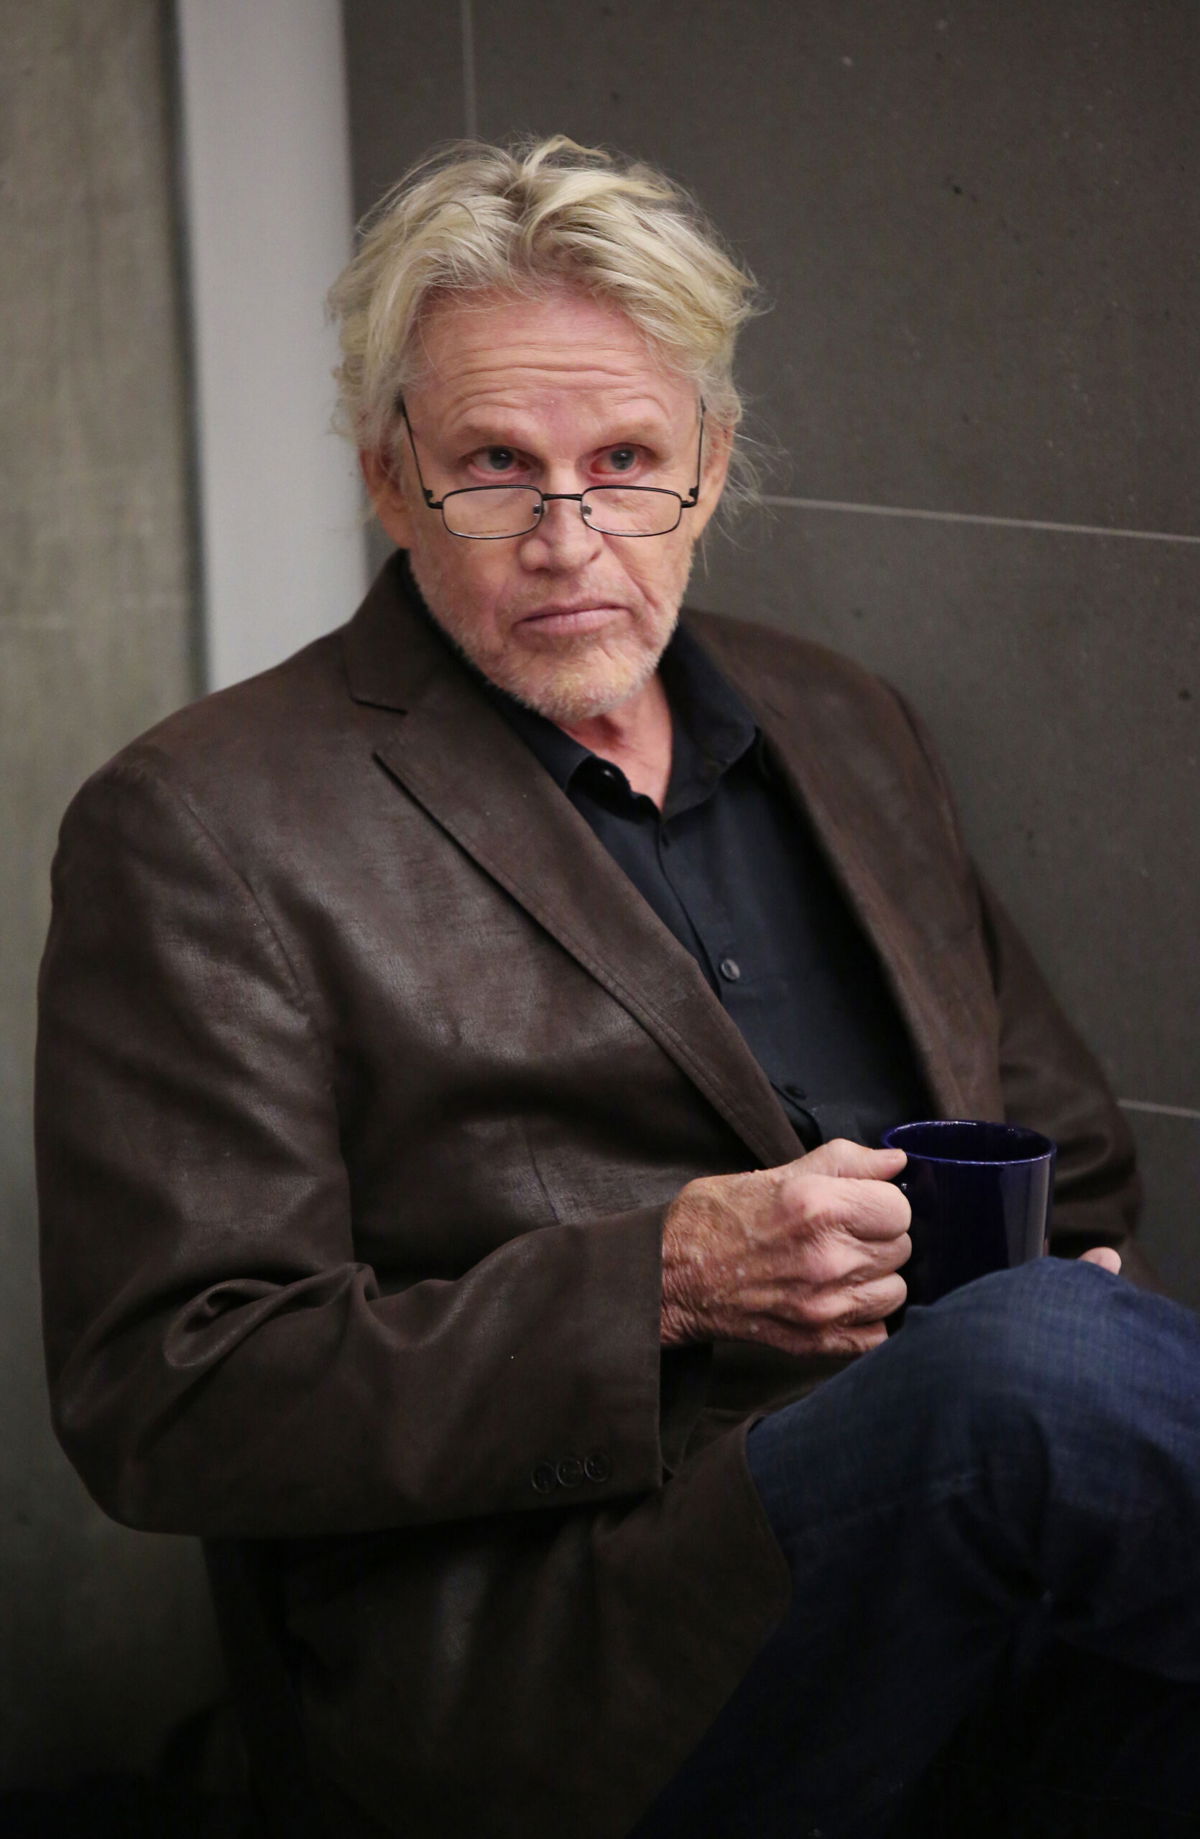 <i>Walter McBride/Getty Images</i><br/>Actor Gary Busey